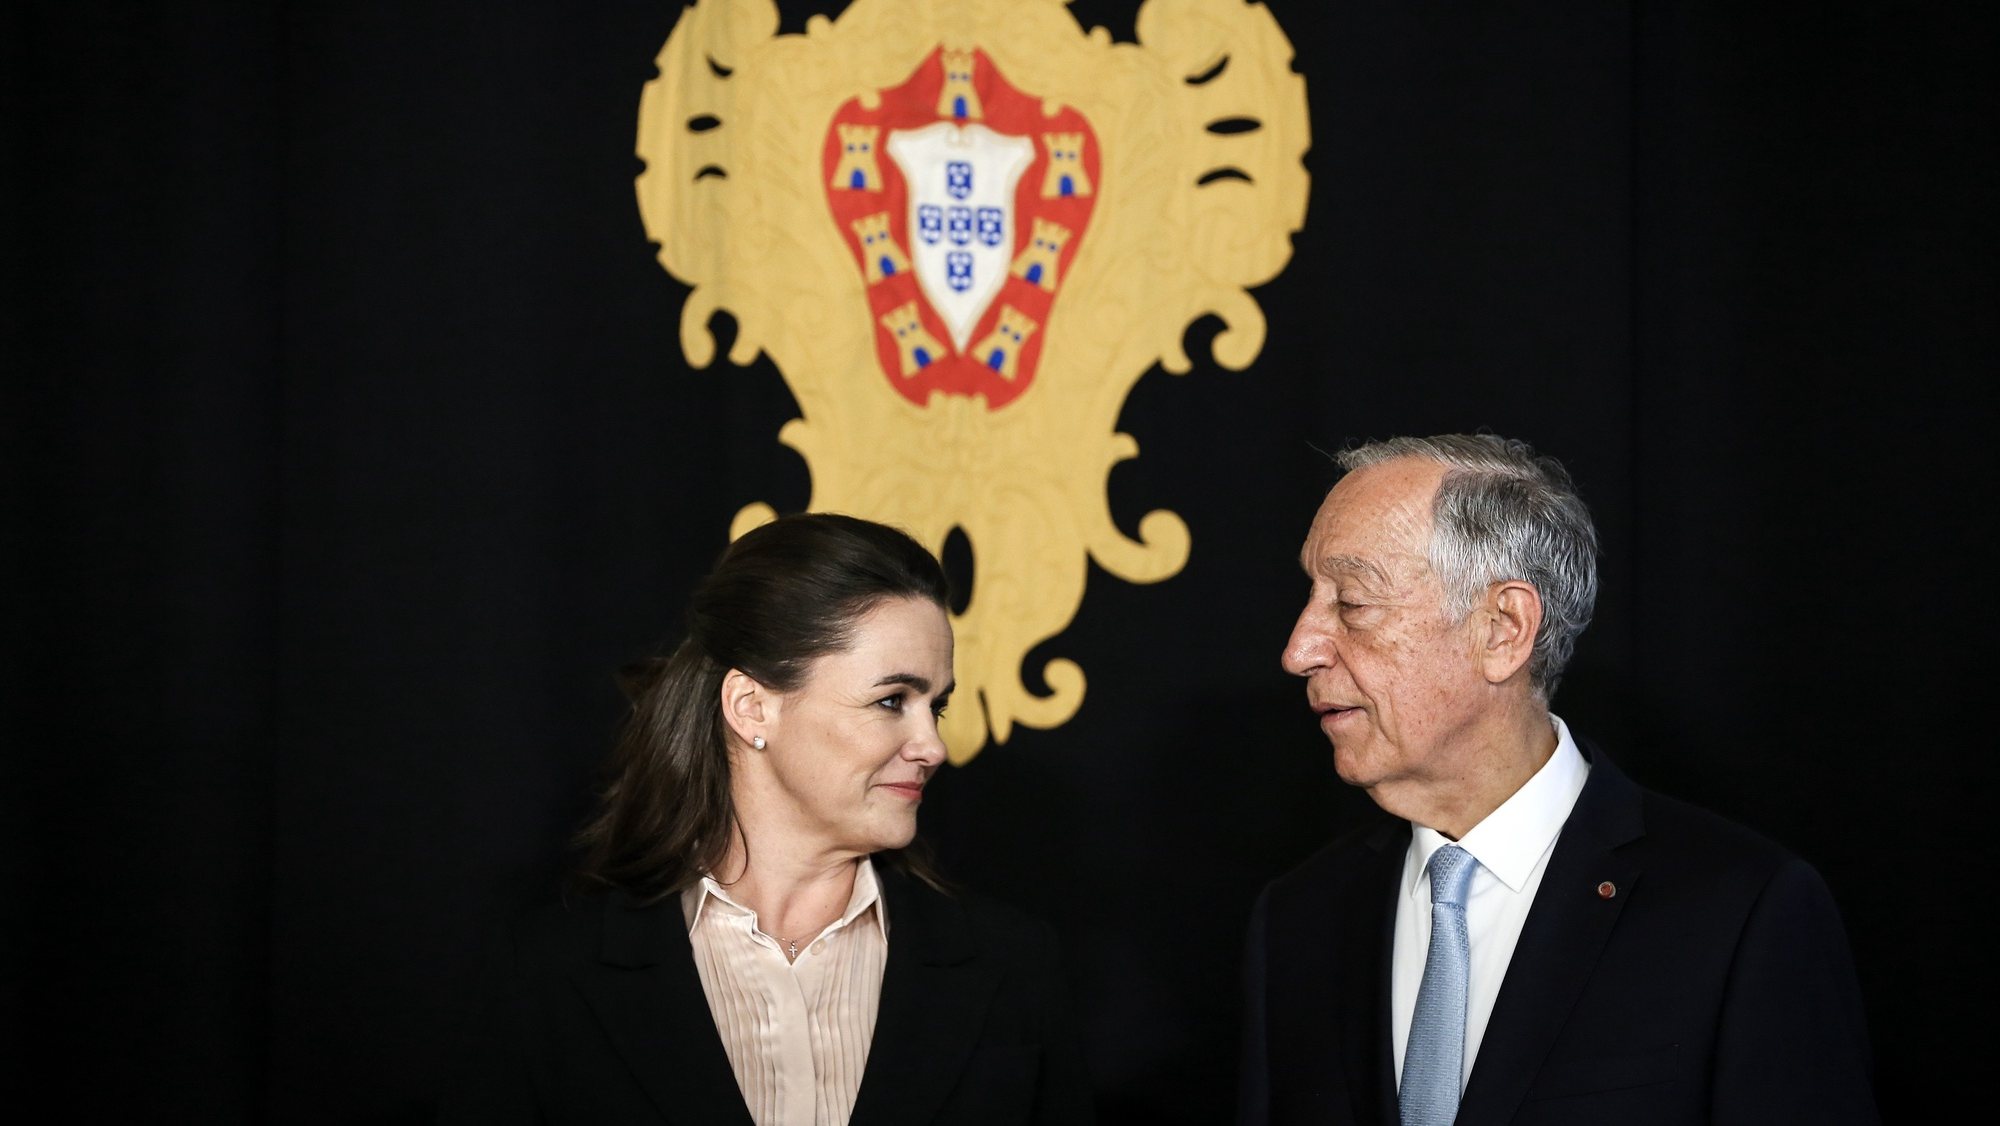 Portuguese President Marcelo Rebelo de Sousa (R) and Hungarian President Katalin Novak (L) during the welcome ceremony before a meeting at the Belem palace in Lisbon, Portugal, 23 February 2023. RODRIGO ANTUNES/LUSA